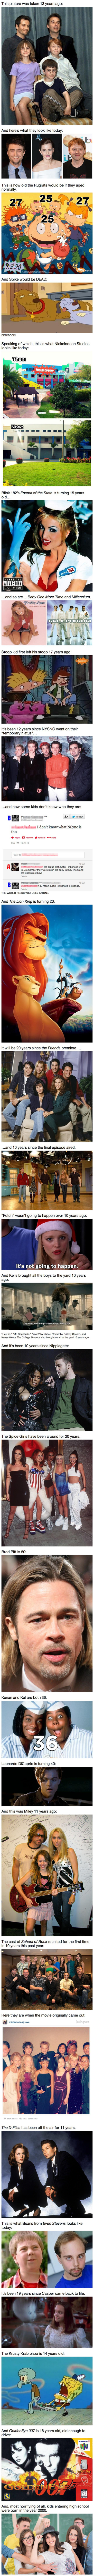 1990s, do you feel old yet?, then and now, millennials